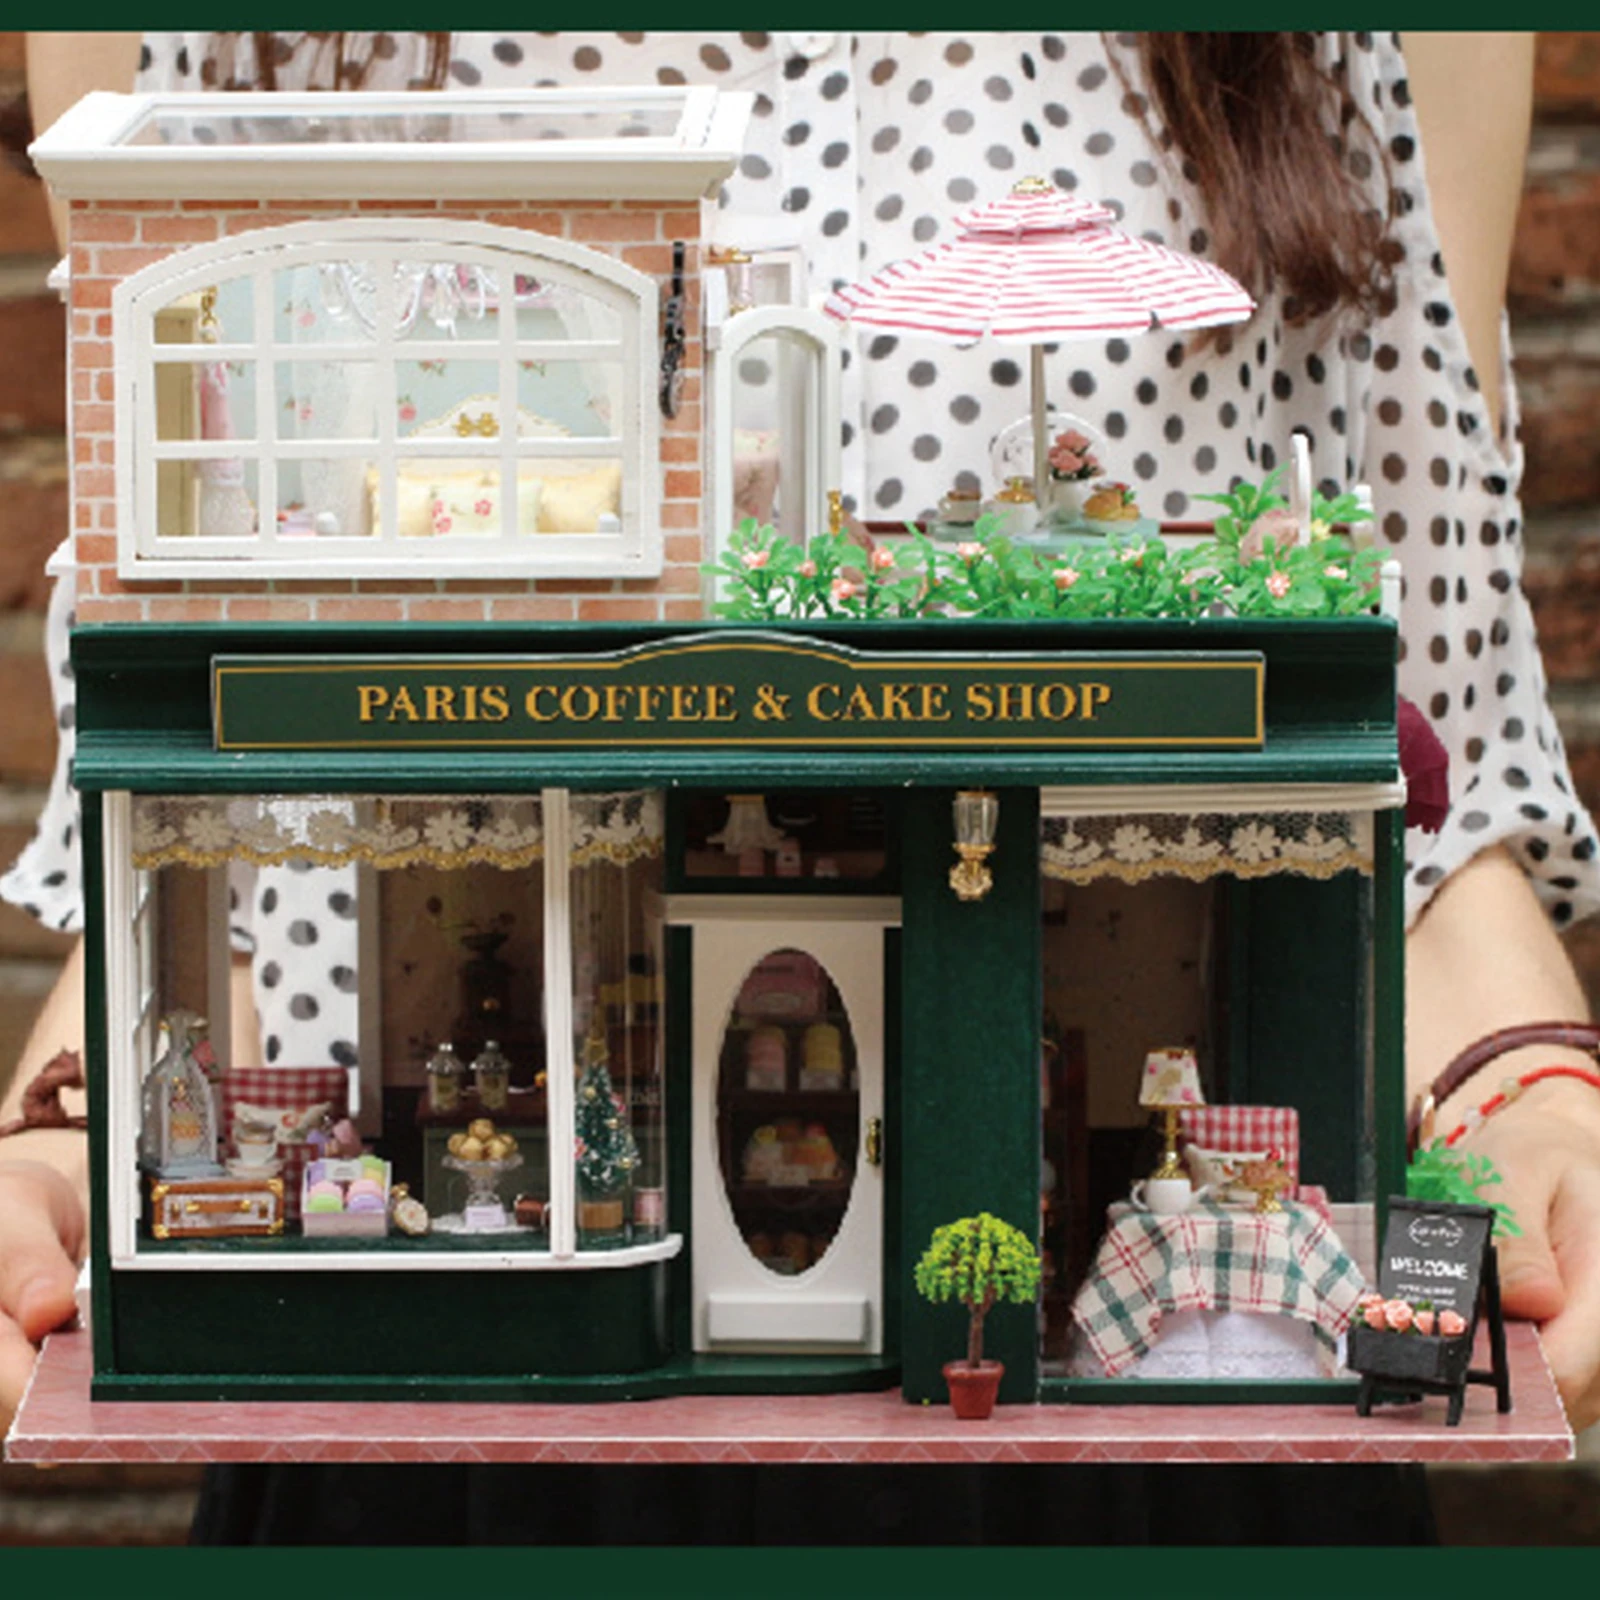 New 3D DIY Doll House with Furniture & Accessories Toy Miniature Doll House Creative Paris Coffee & Cake Shop DIY Doll House Toy